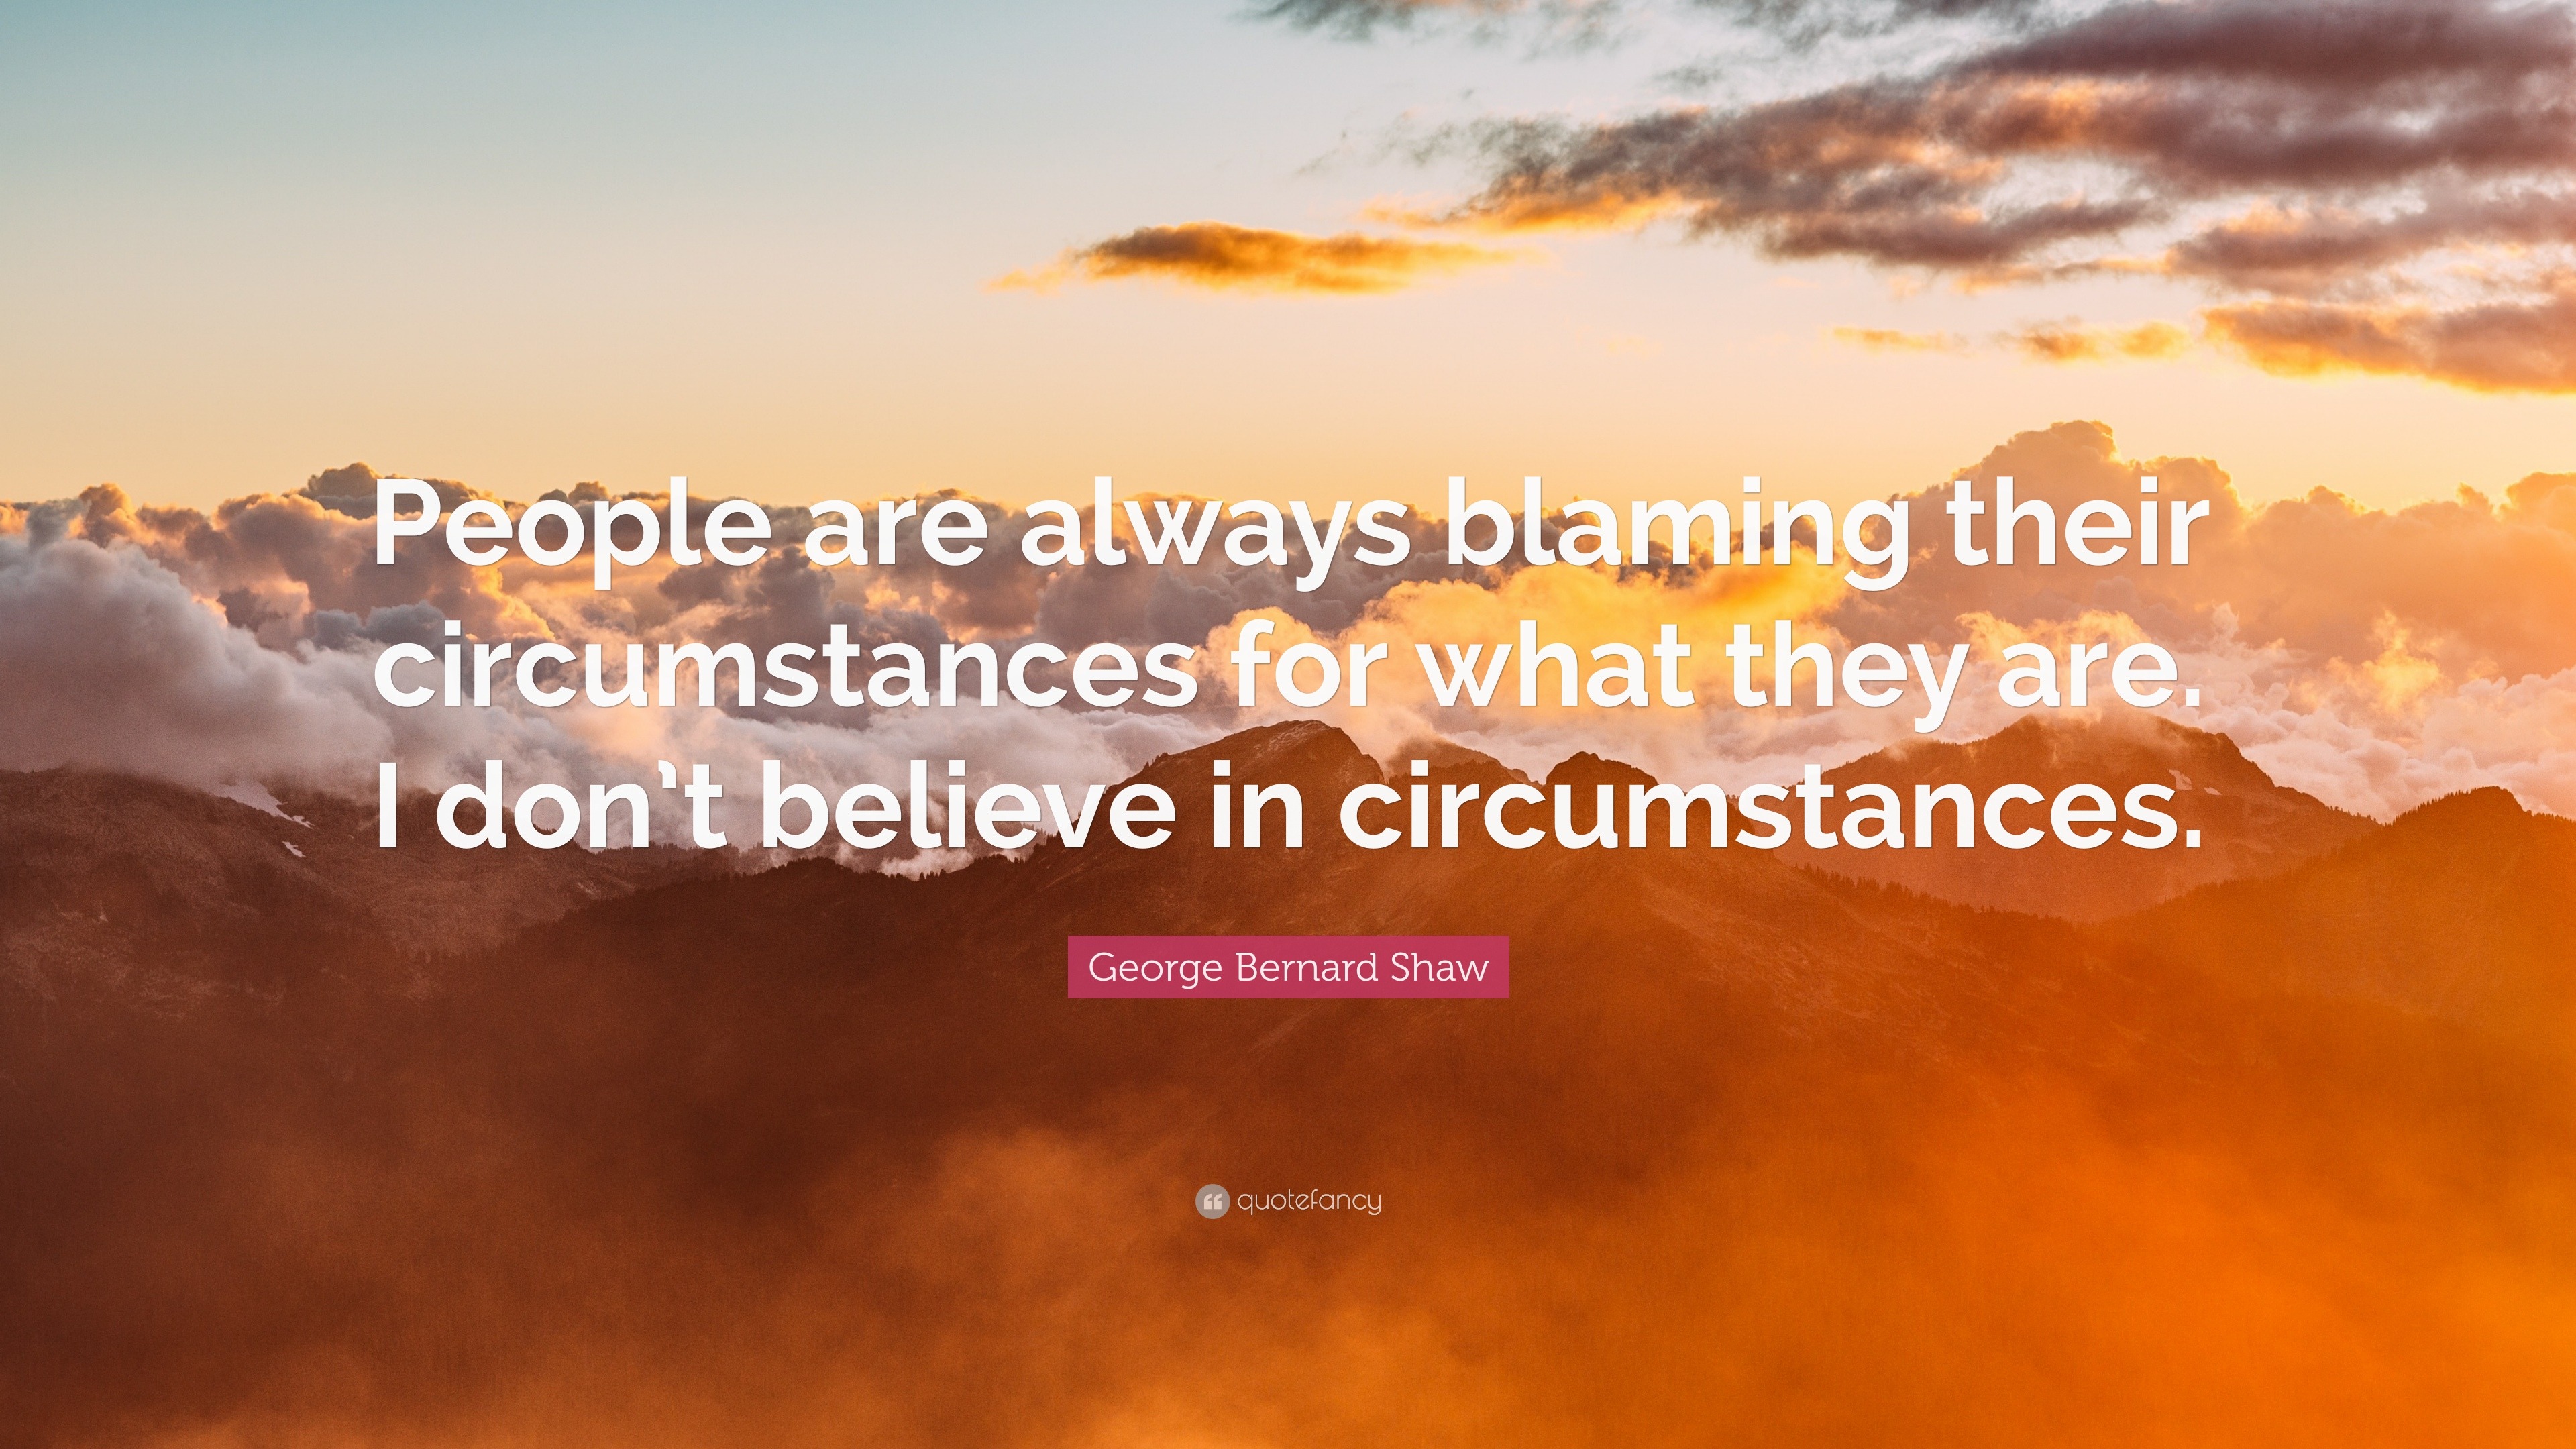 George Bernard Shaw Quote: “People are always blaming their ...